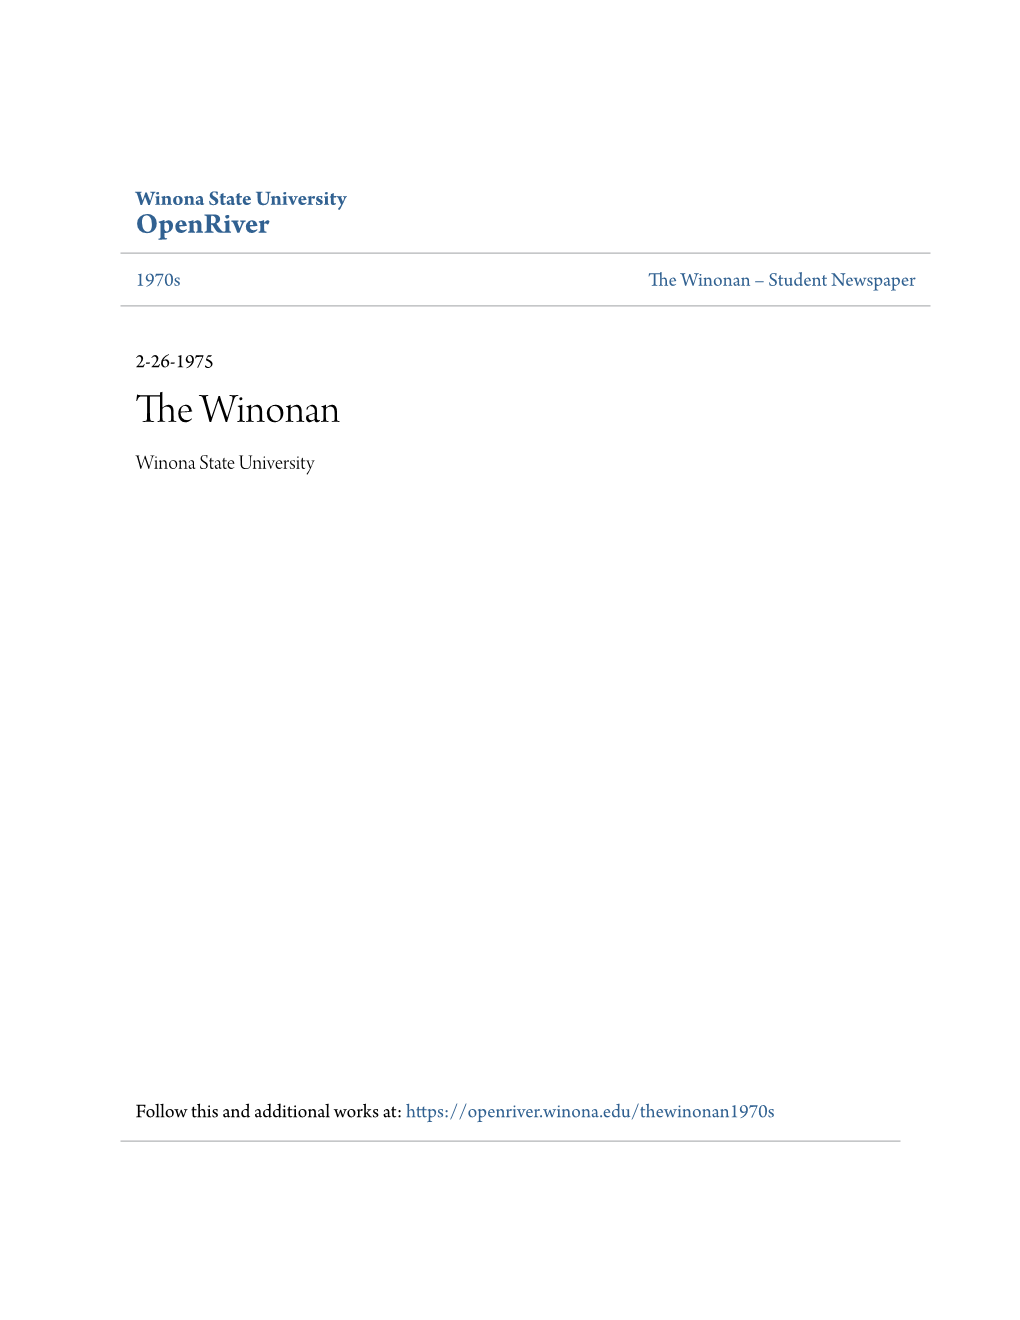 The Winonan Is Written Second Class Postage Paid Copy Is 6 P.M